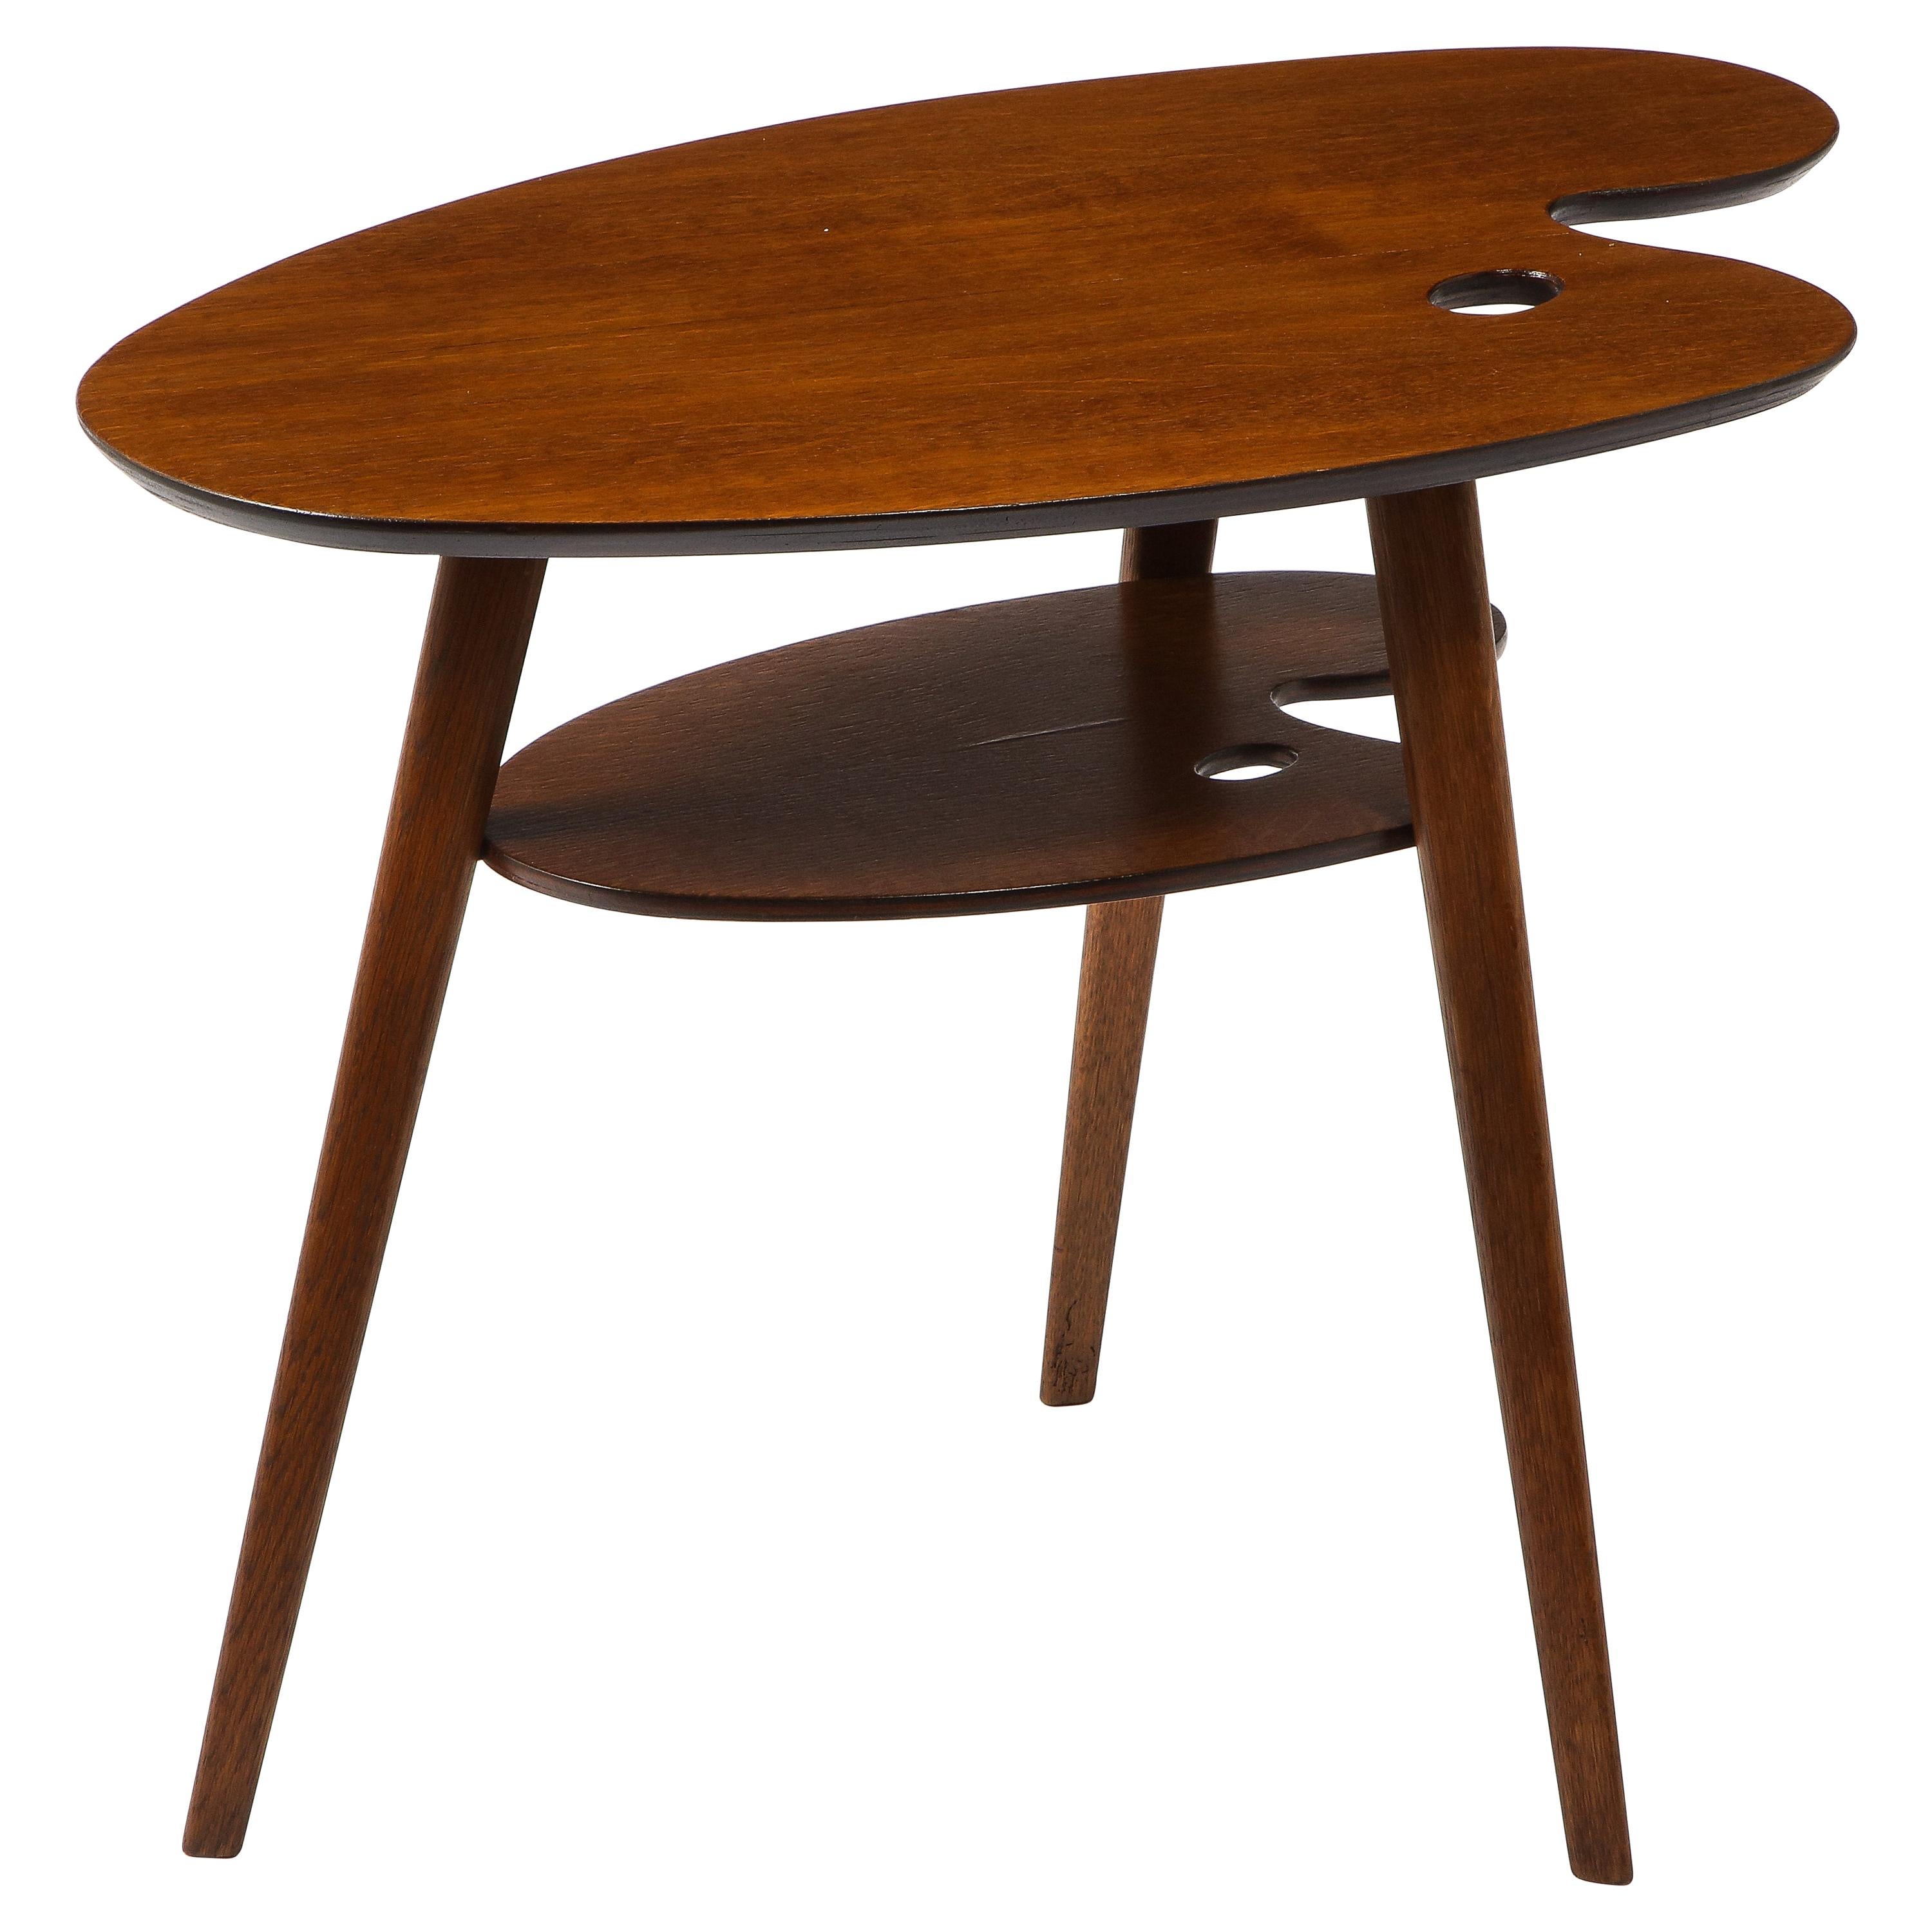 A staple of French midcentury design, the Palette shaped table is emblematic of the era. 